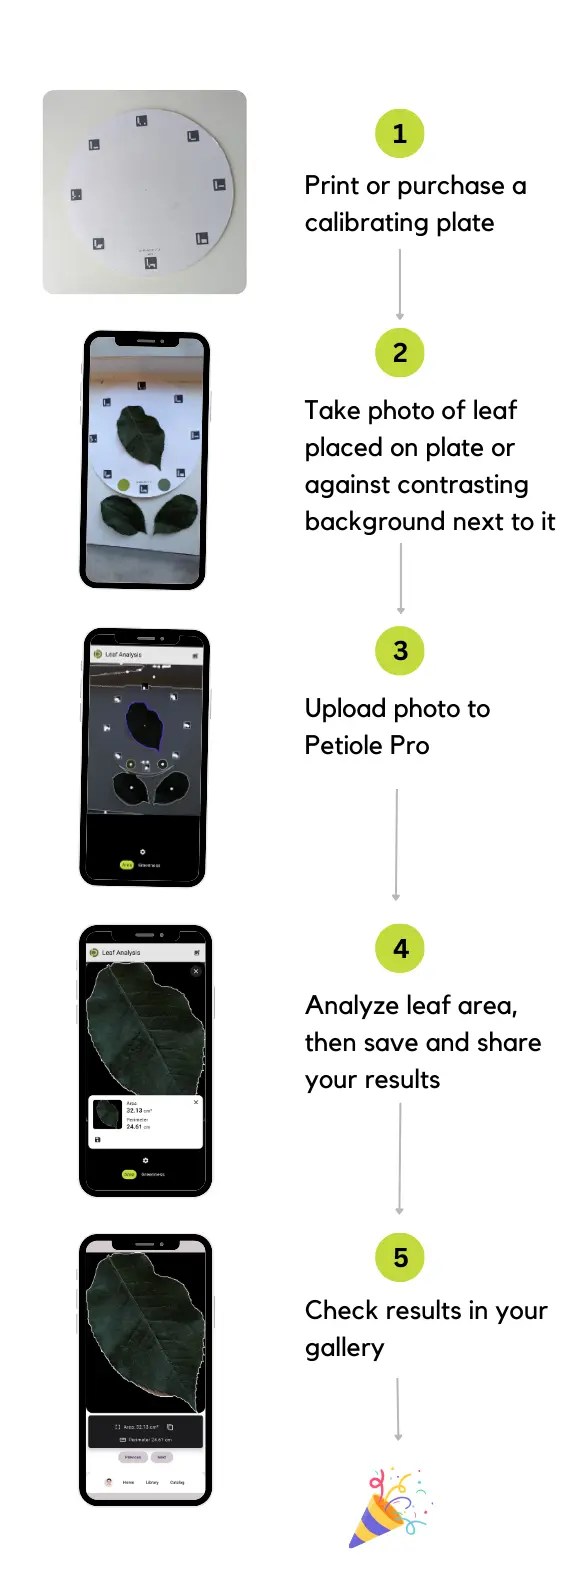 How does Petiole Pro work for leaf area measurement? Just follow these three steps: take an image of the leaf on a calibrating plate or next to it, upload the image to Petiole Pro, and receive measurements for leaf area, leaf parameters, leaf width, and leaf length—all from one photo.